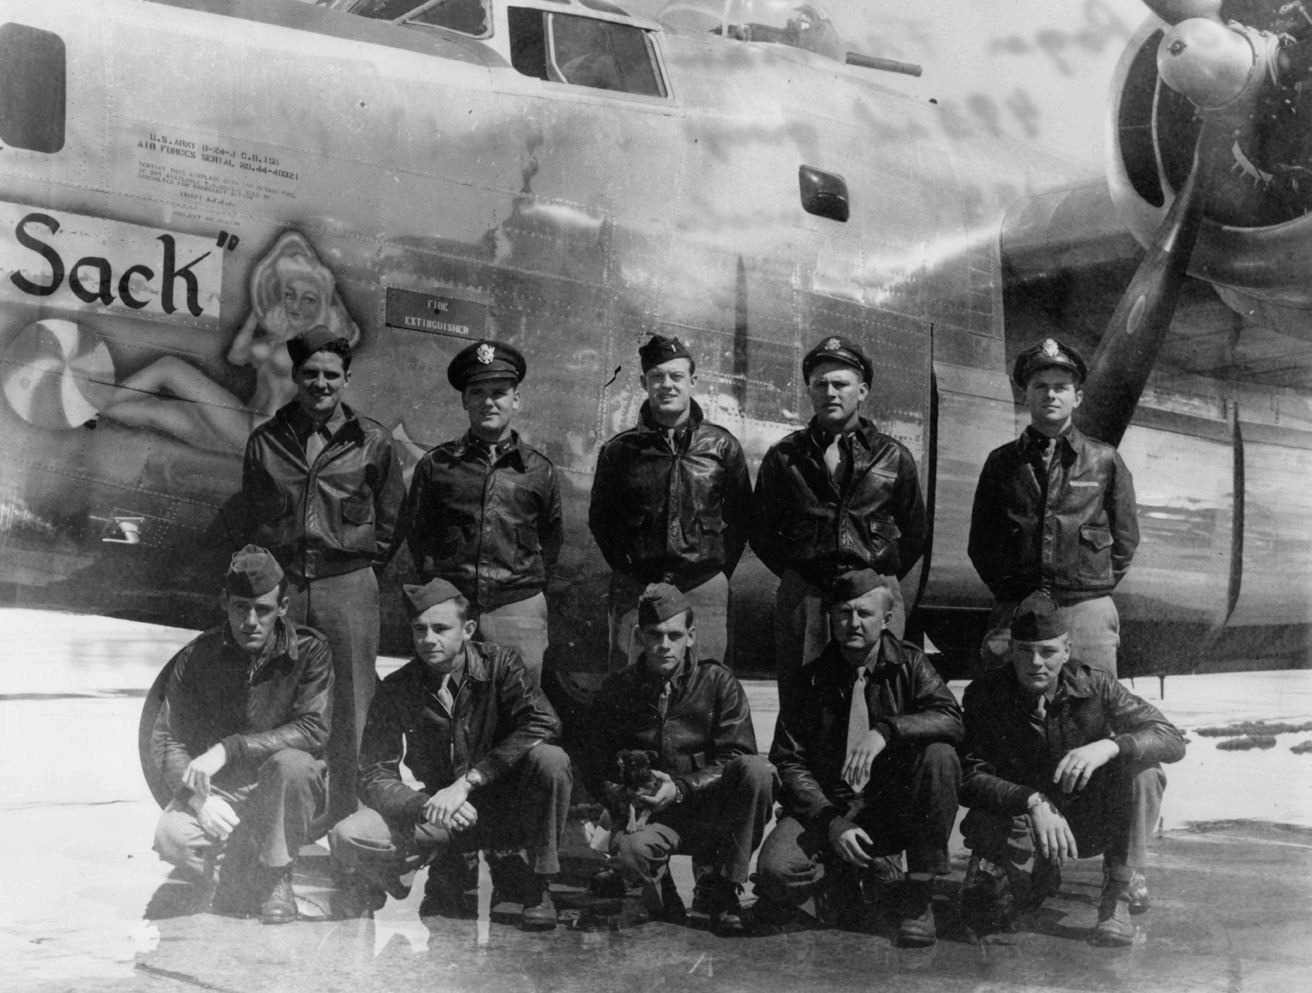 B-24J bomber 'Old Sack' and crew, of USAAF 493rd Bombardment Group, at RAF Debach, England, United Kingdom, spring 1944